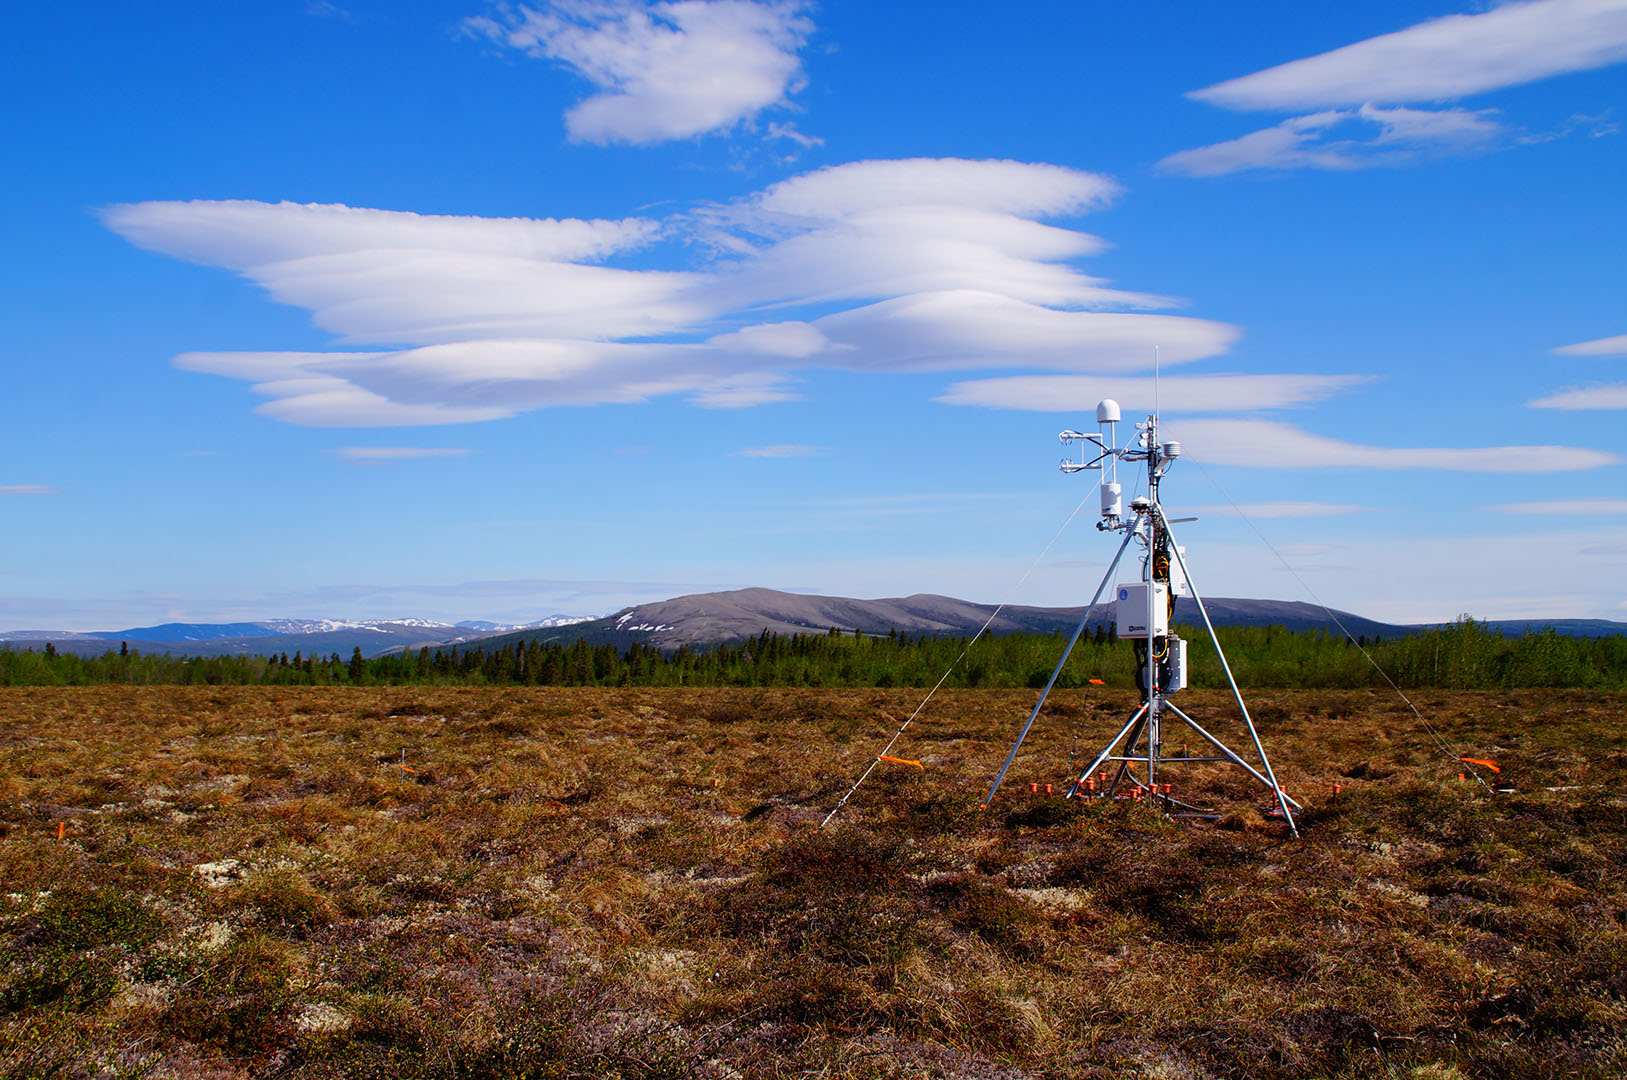 A flux tower in a brown field with clouds above.